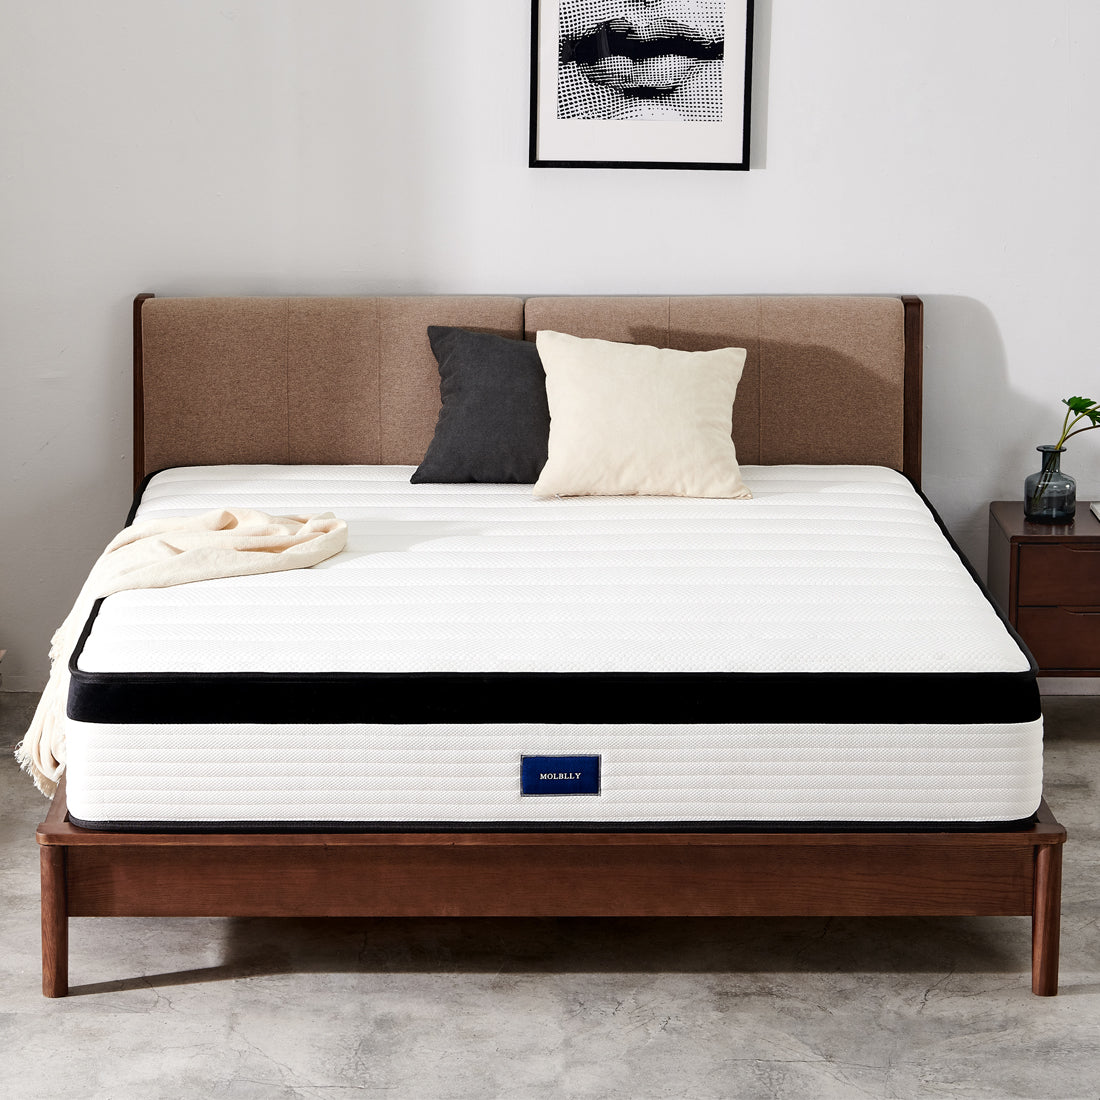 Hybrid mattress is a mattress composed of two layers of structure